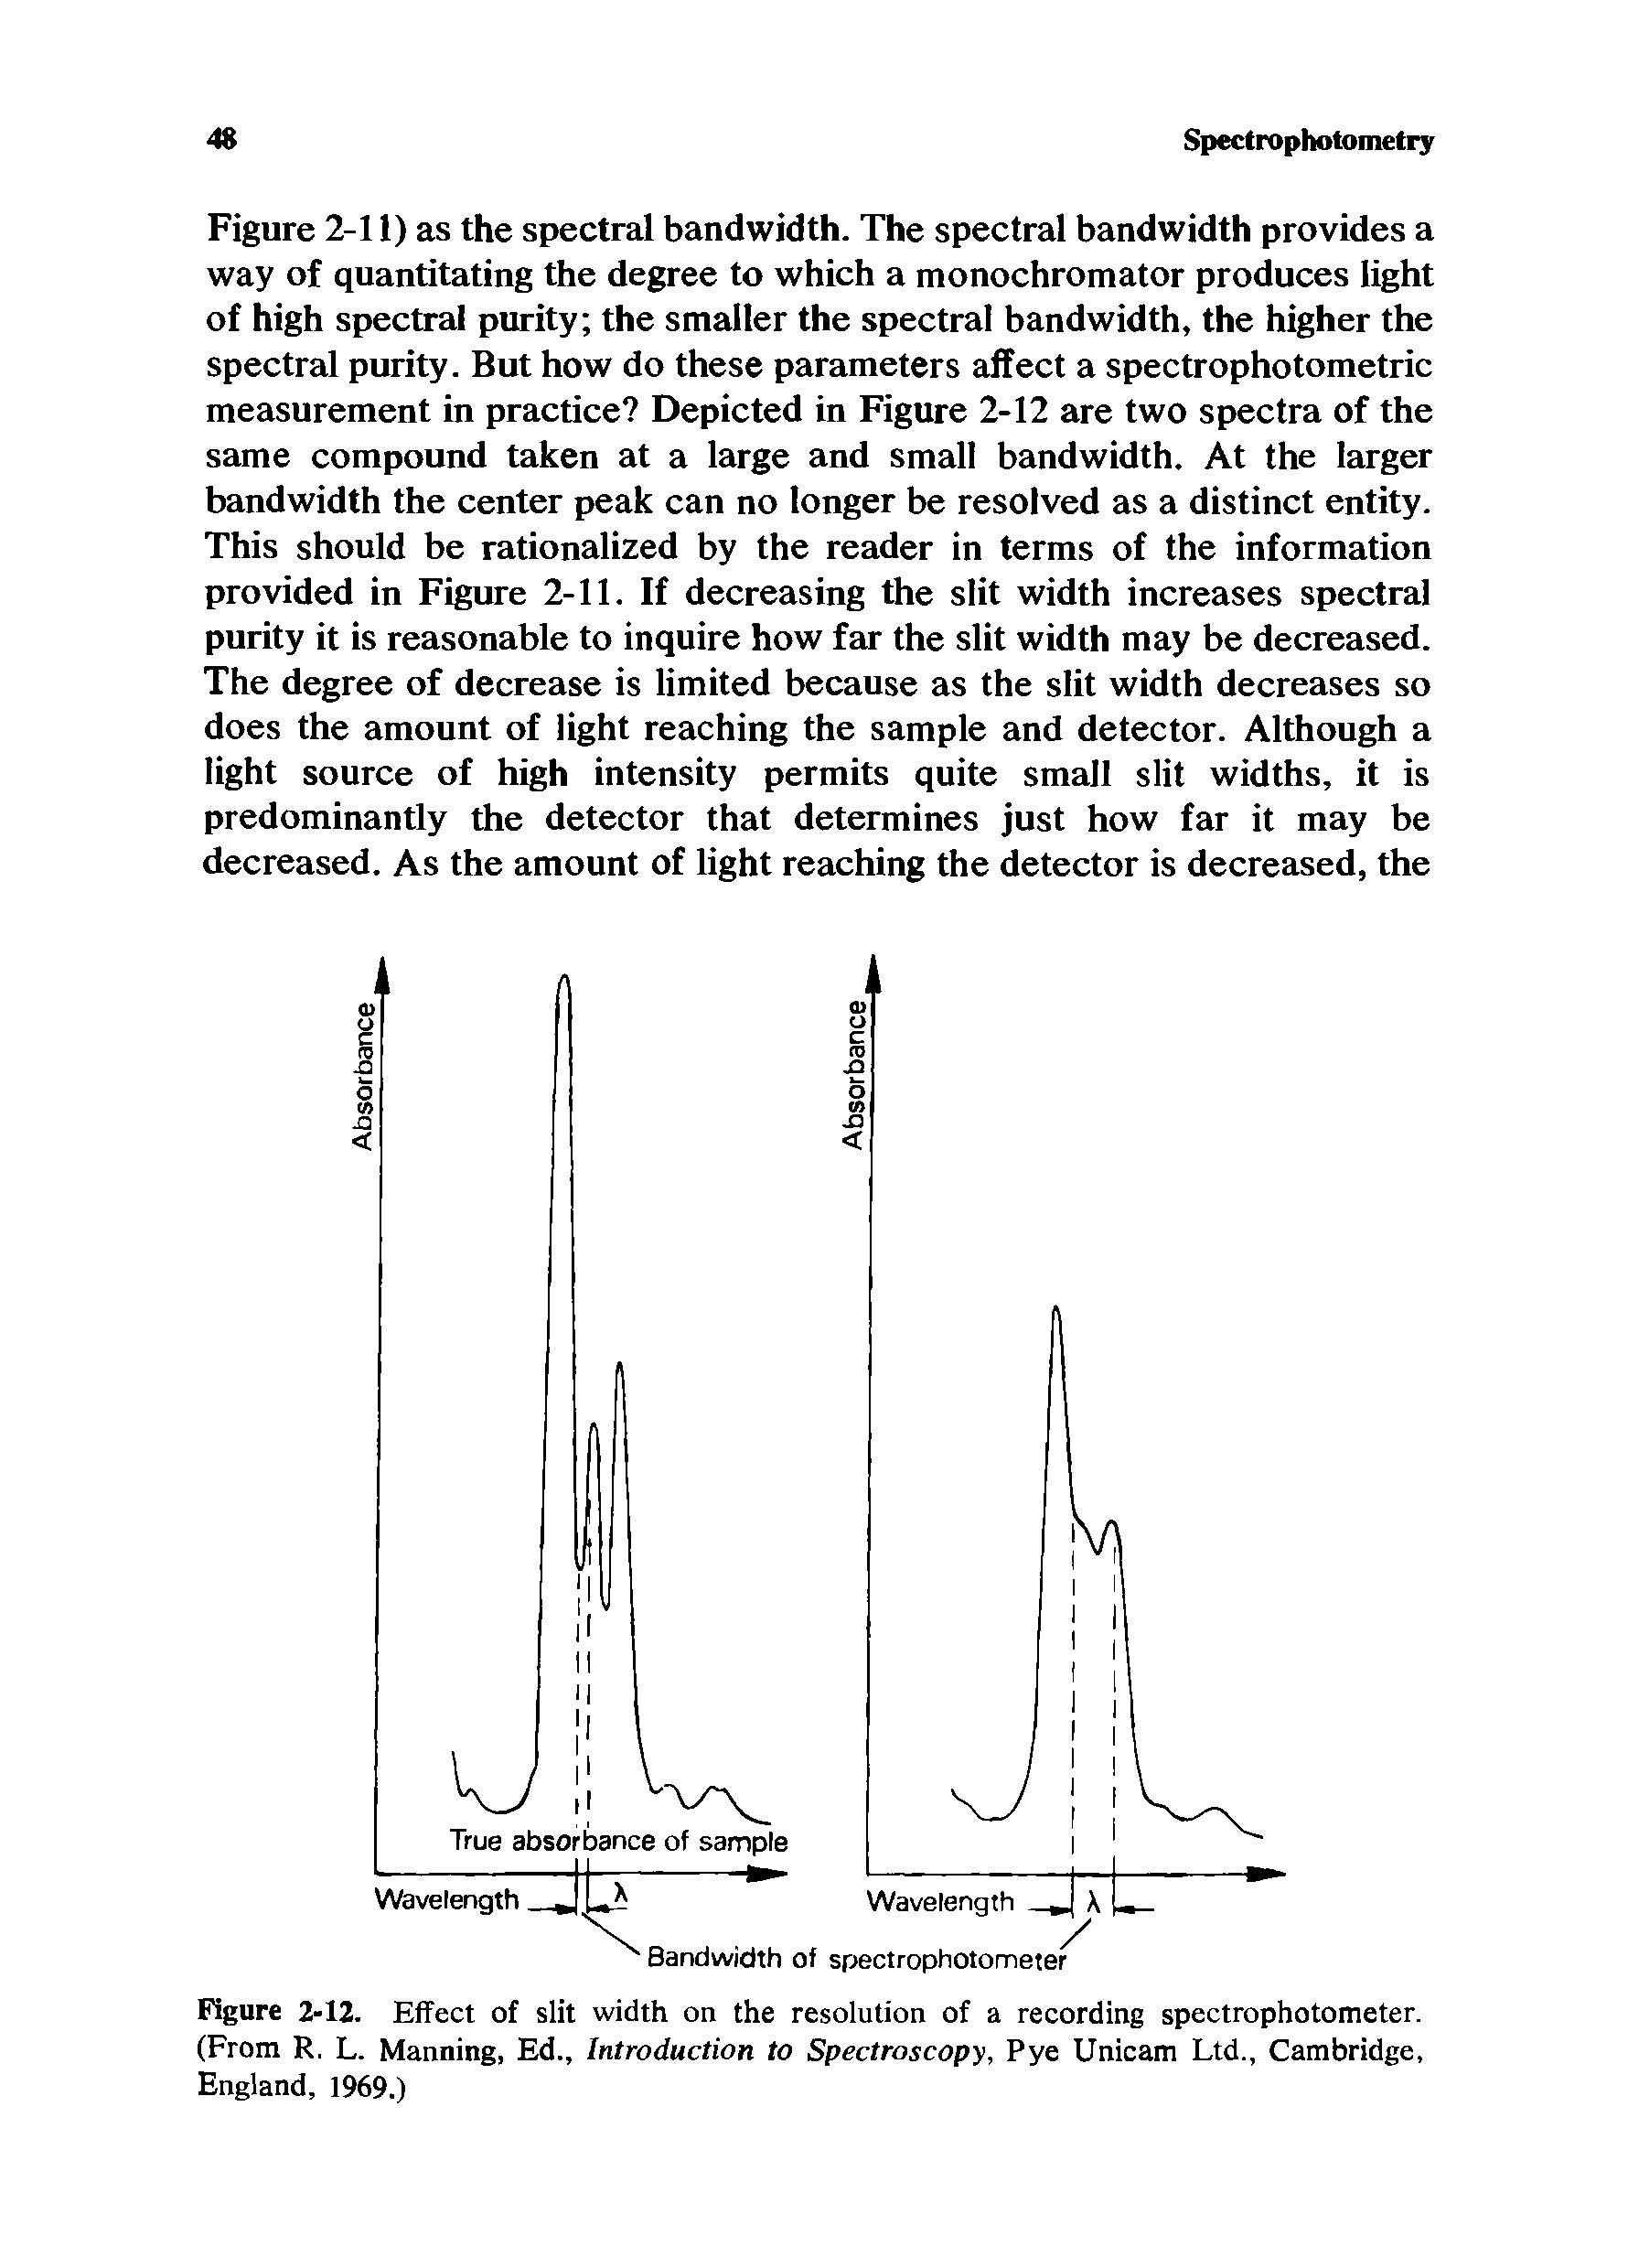 Figure 2-12. Effect of slit width on the resolution of a recording spectrophotometer. (From R. L. Manning, Ed., Introduction to Spectroscopy, Pye Unicam Ltd., Cambridge, England, 1969.)...